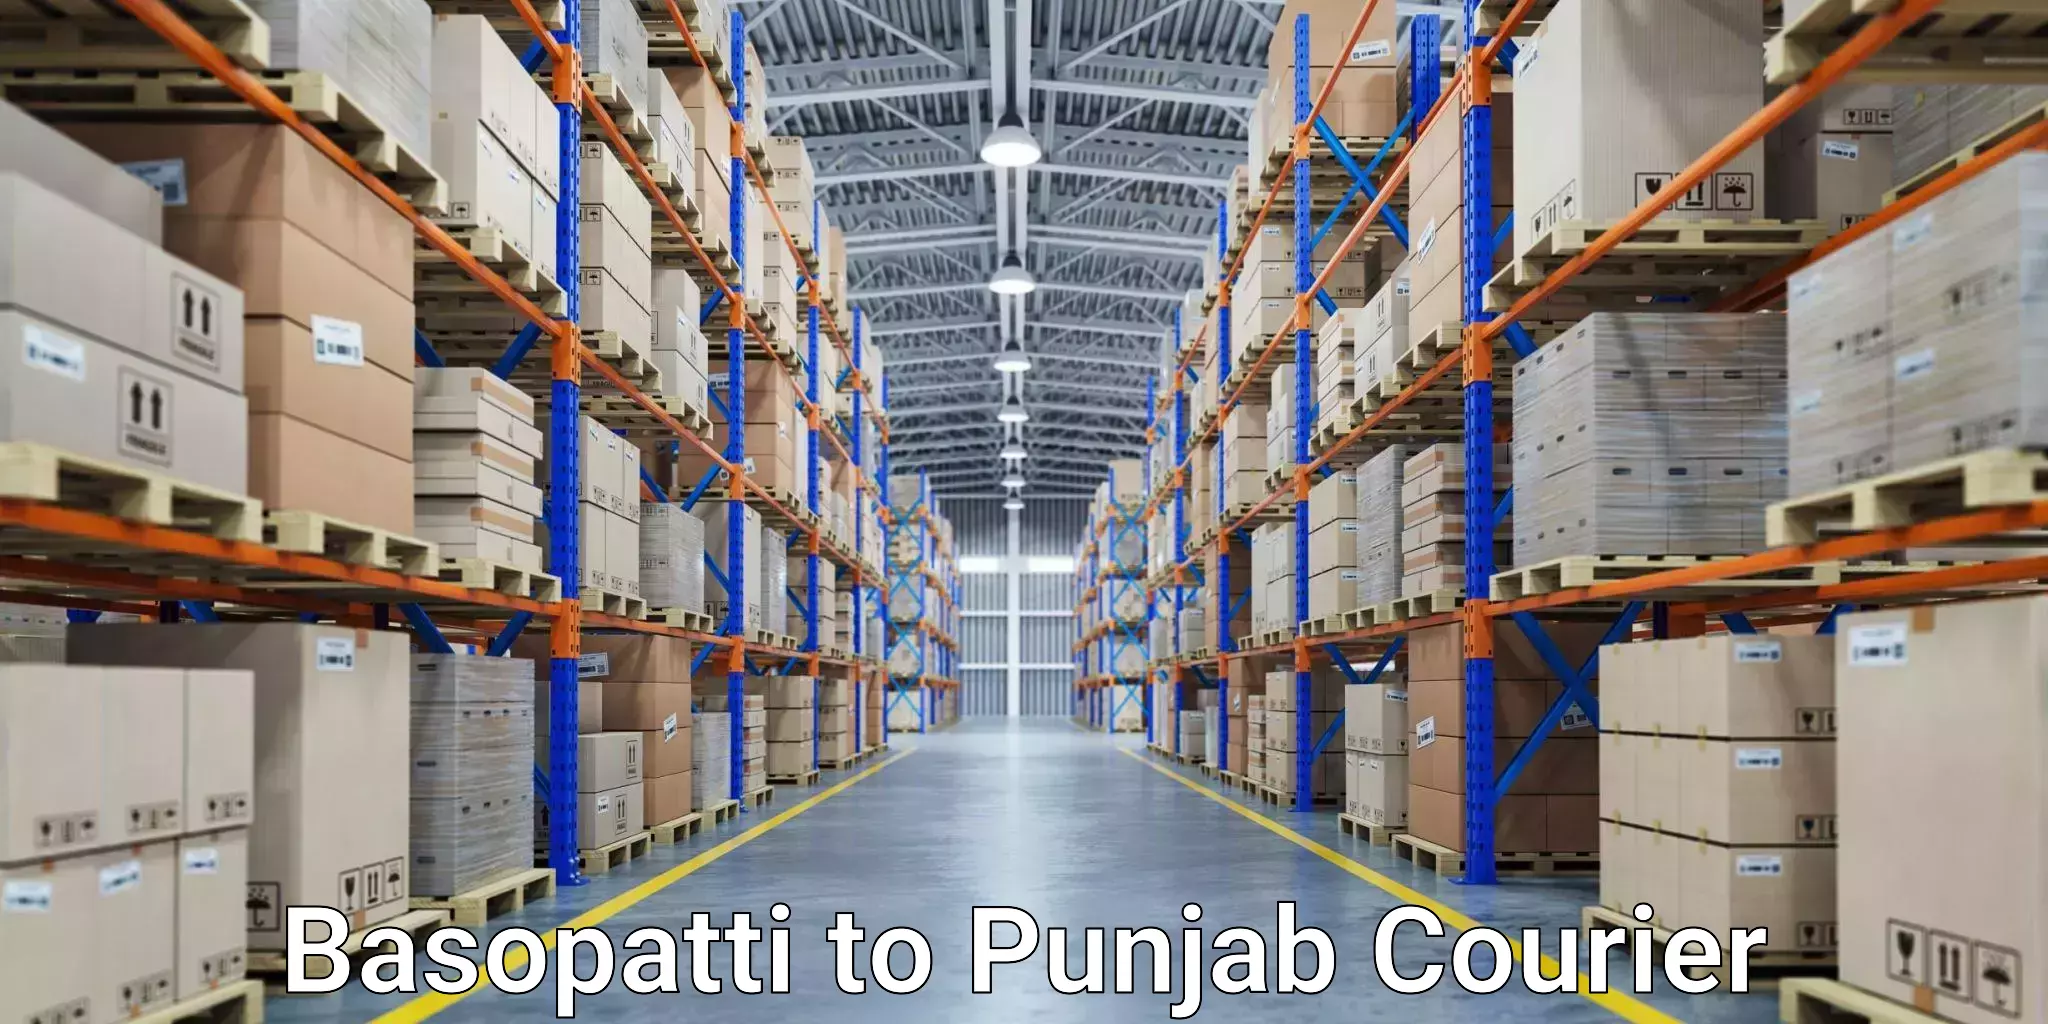 Express delivery solutions Basopatti to Punjab